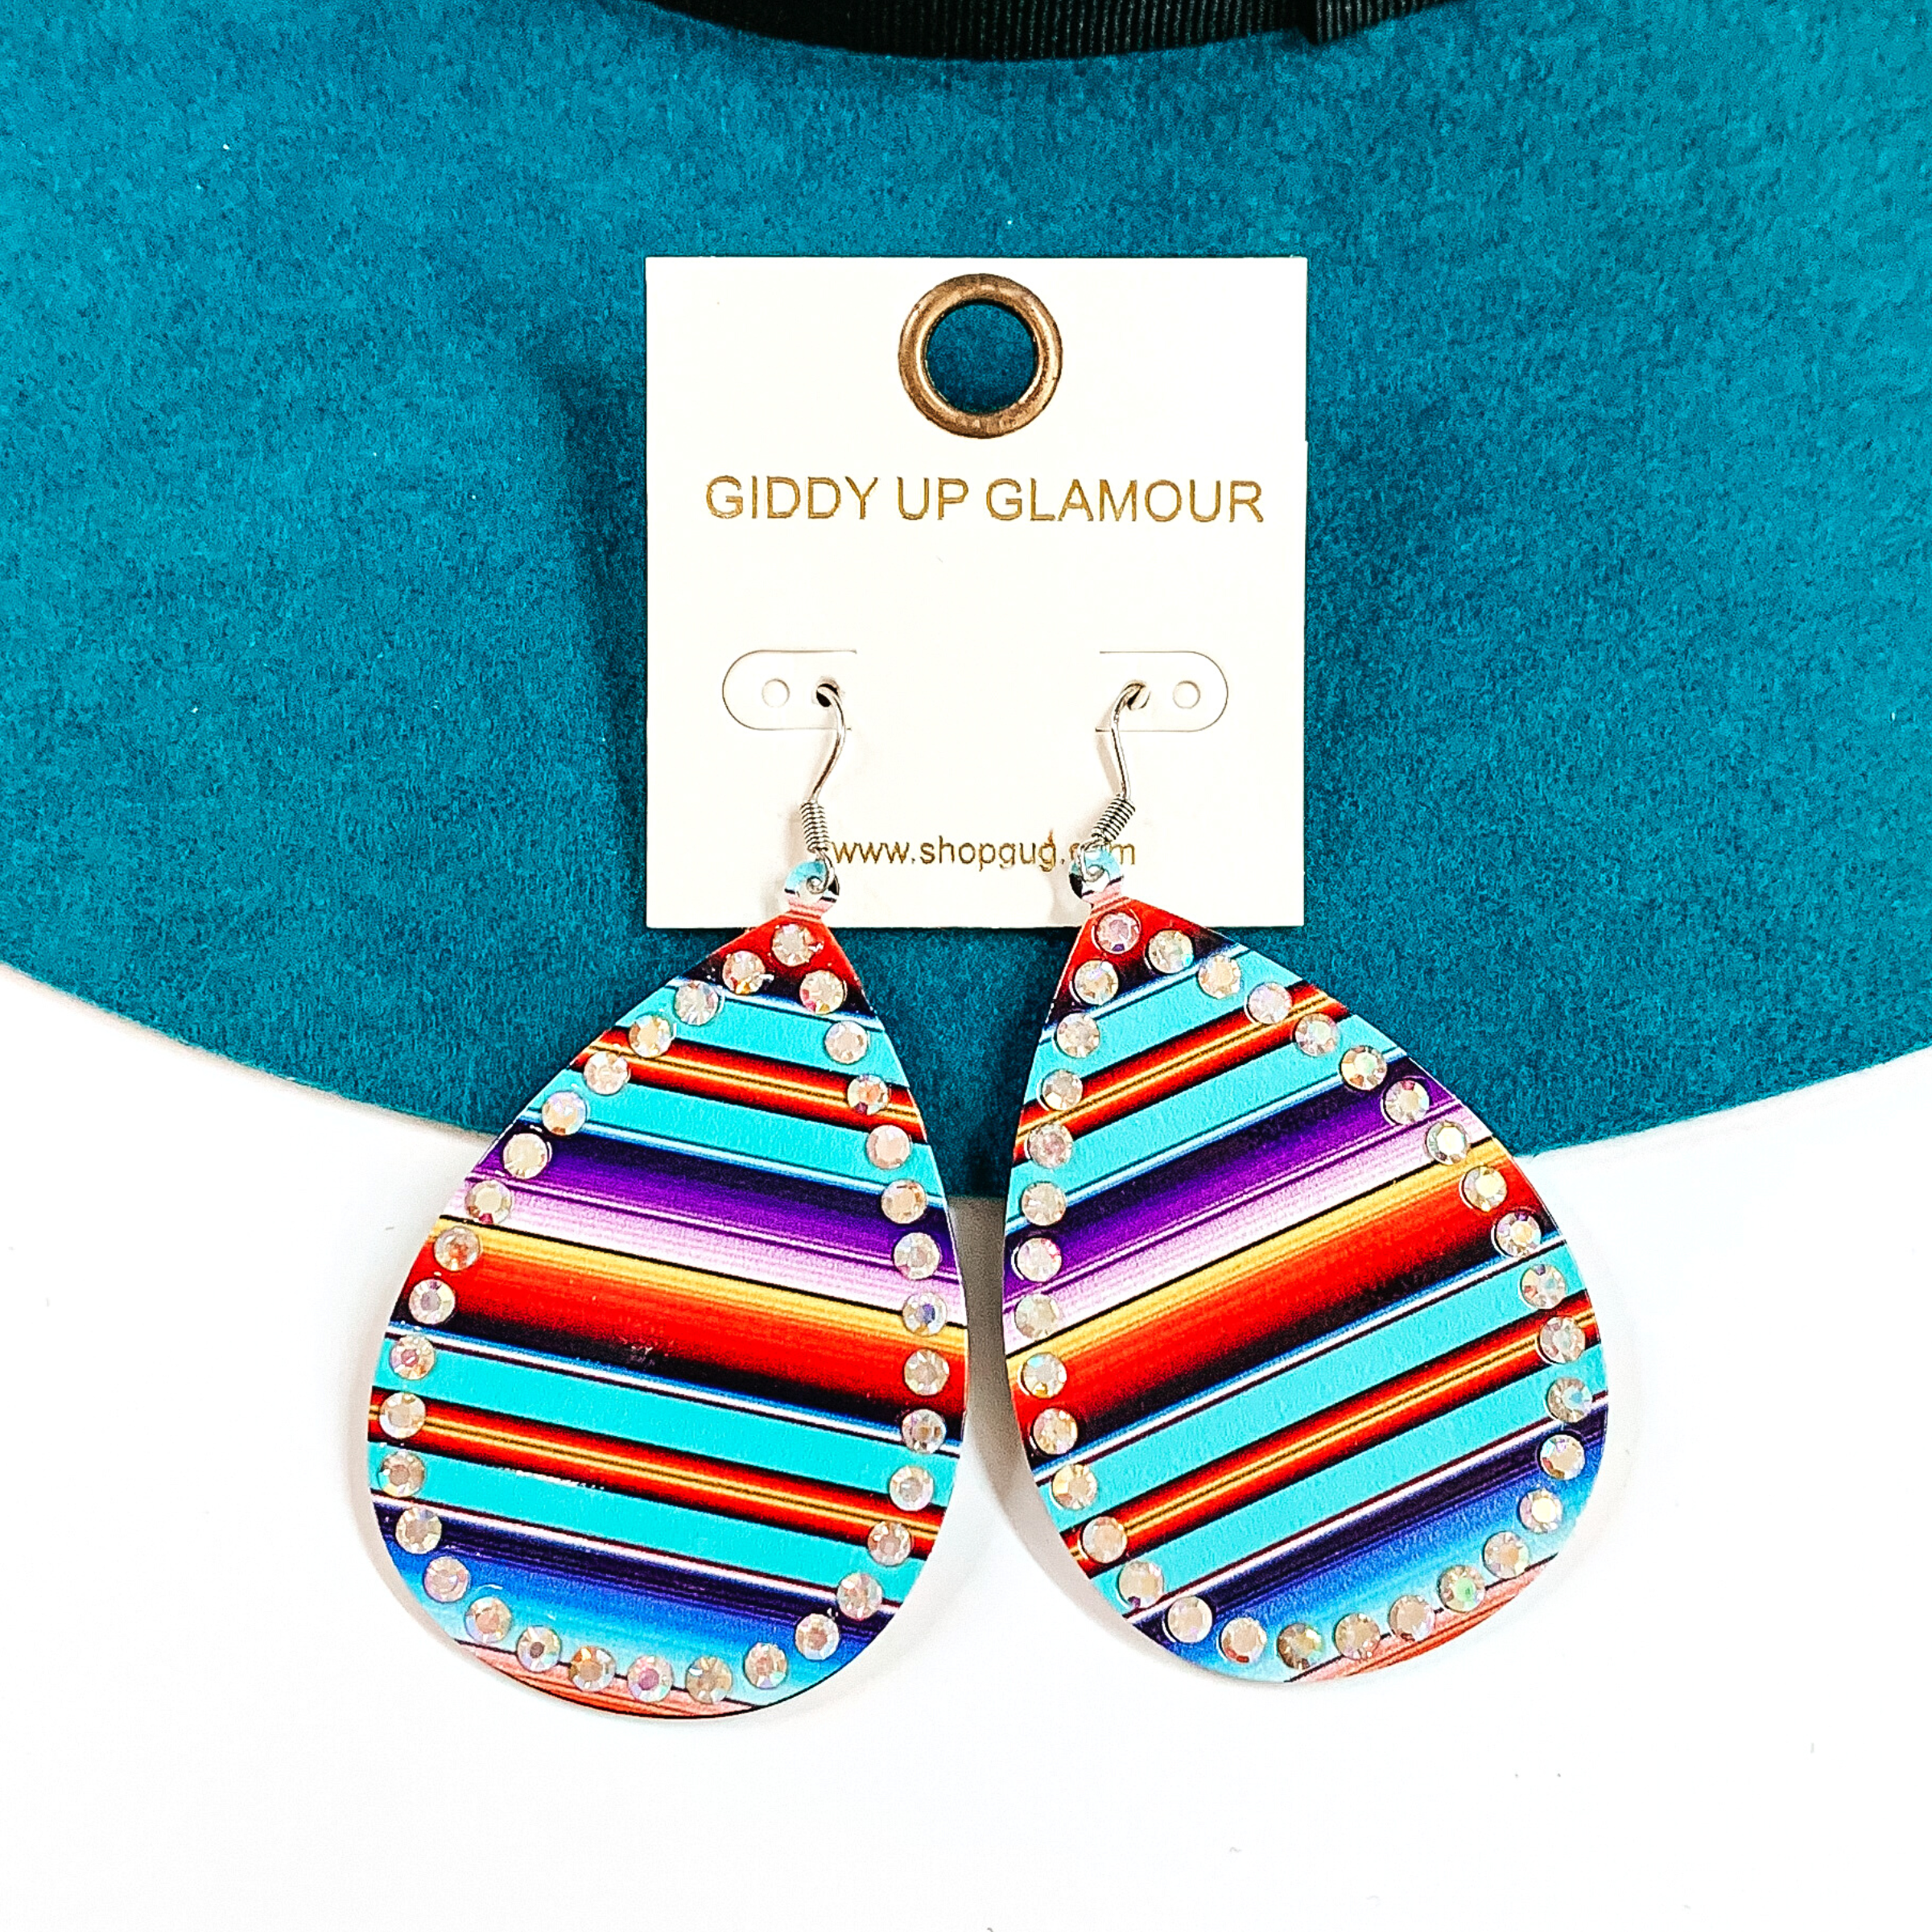 These are teardrop serape print earrings with ab crystals all around. The serape print  is in a turquoise mix such as; turquoise, purple, orange, blue, and a bit of yellow.  These  earrings are taken on a teal felt hat brim and on a white background.